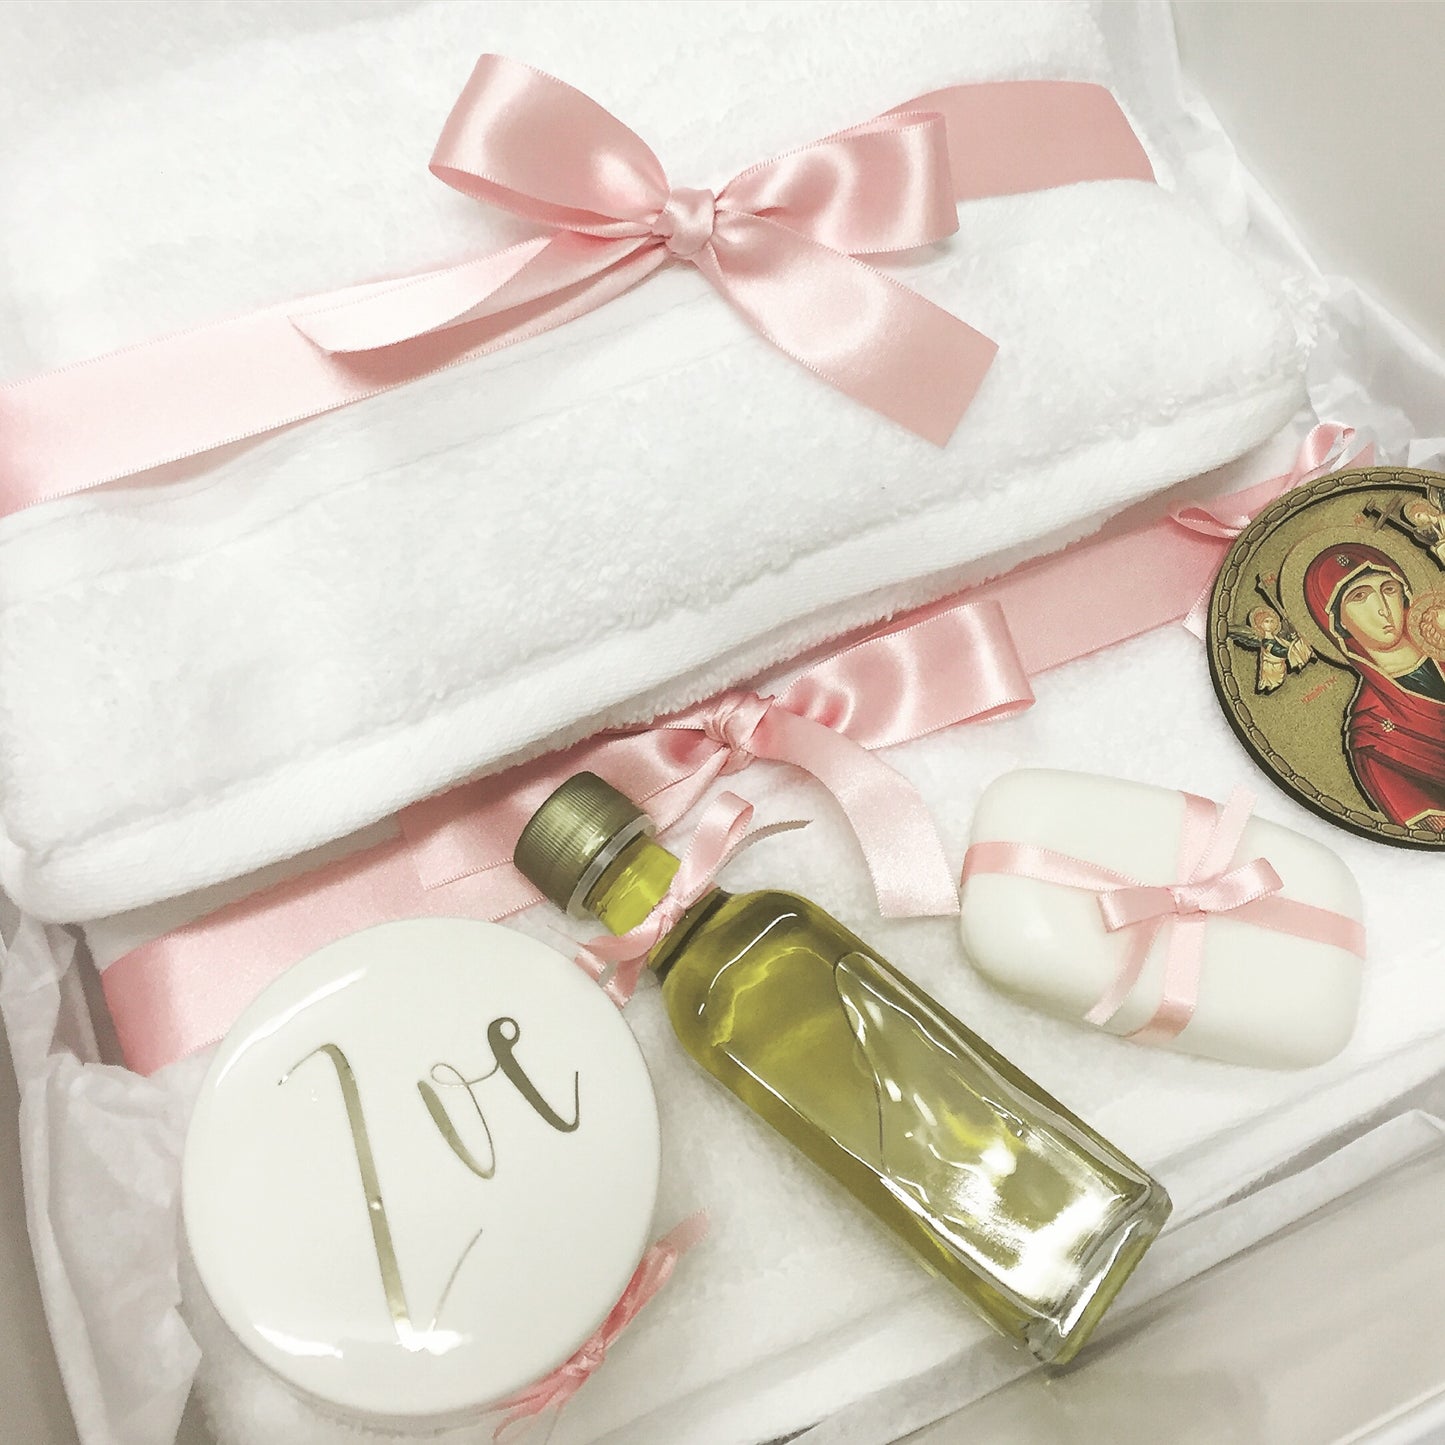 Classic Orthodox Package includes 1 x 1 x Your choice of White Extra Large Box, Clear Extra Large Acrylic Box, No Box. (Price varies depending on which option you choose.) 1 x Bath Towel 1 x Hand Towel 1 x Oil Sheet & Cap 1 x Singlet 1 x Oil 1 x Personalised Trinket Box 1 x Soap 1 x Socks 1 x Icon